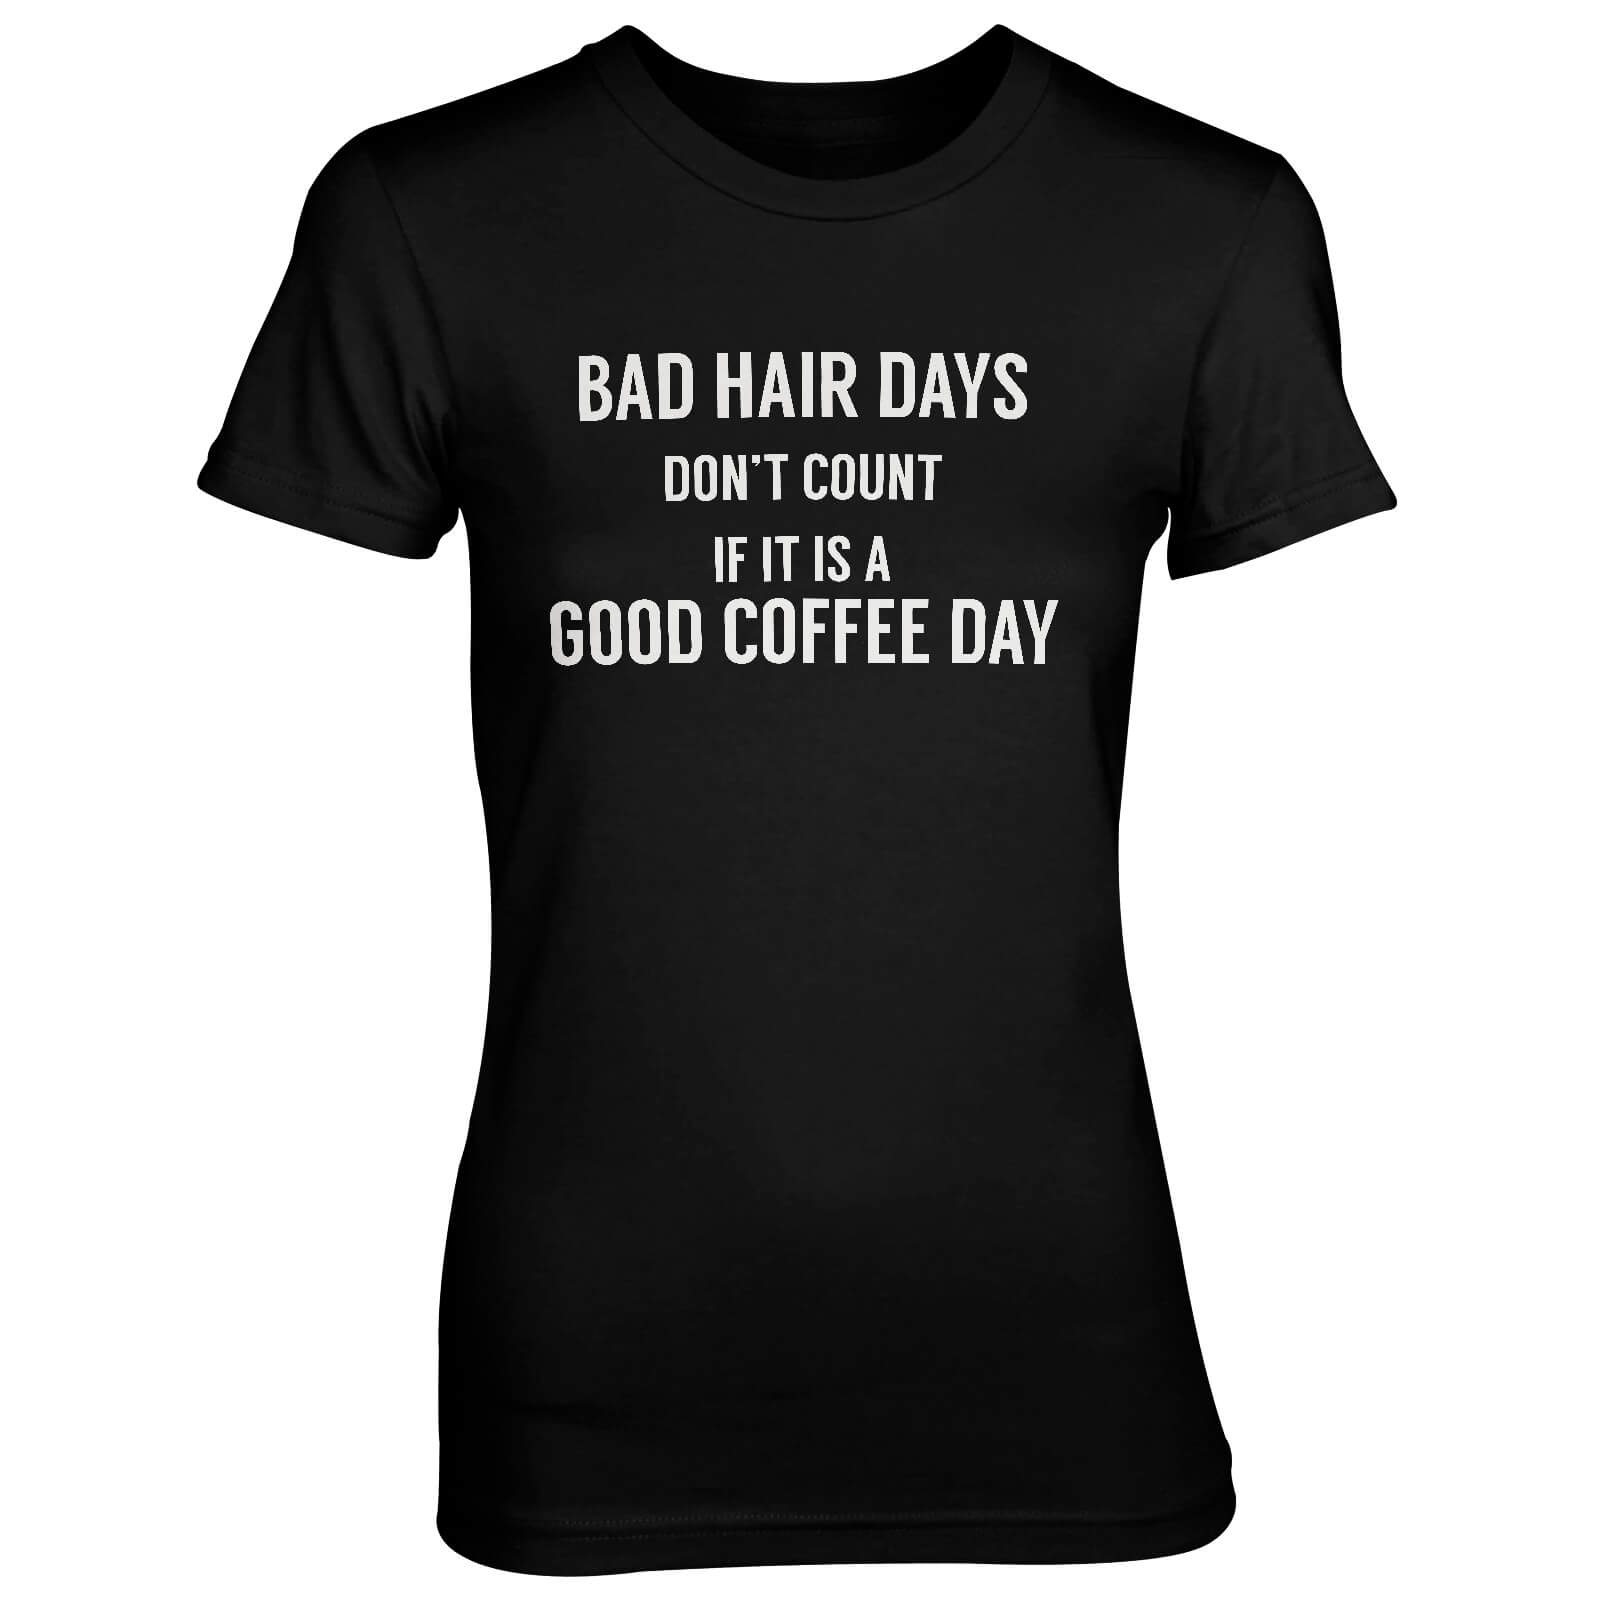 Bad Hair Days Don't Count If It's A Good Coffee Day Women's Black T-Shirt - S - Black